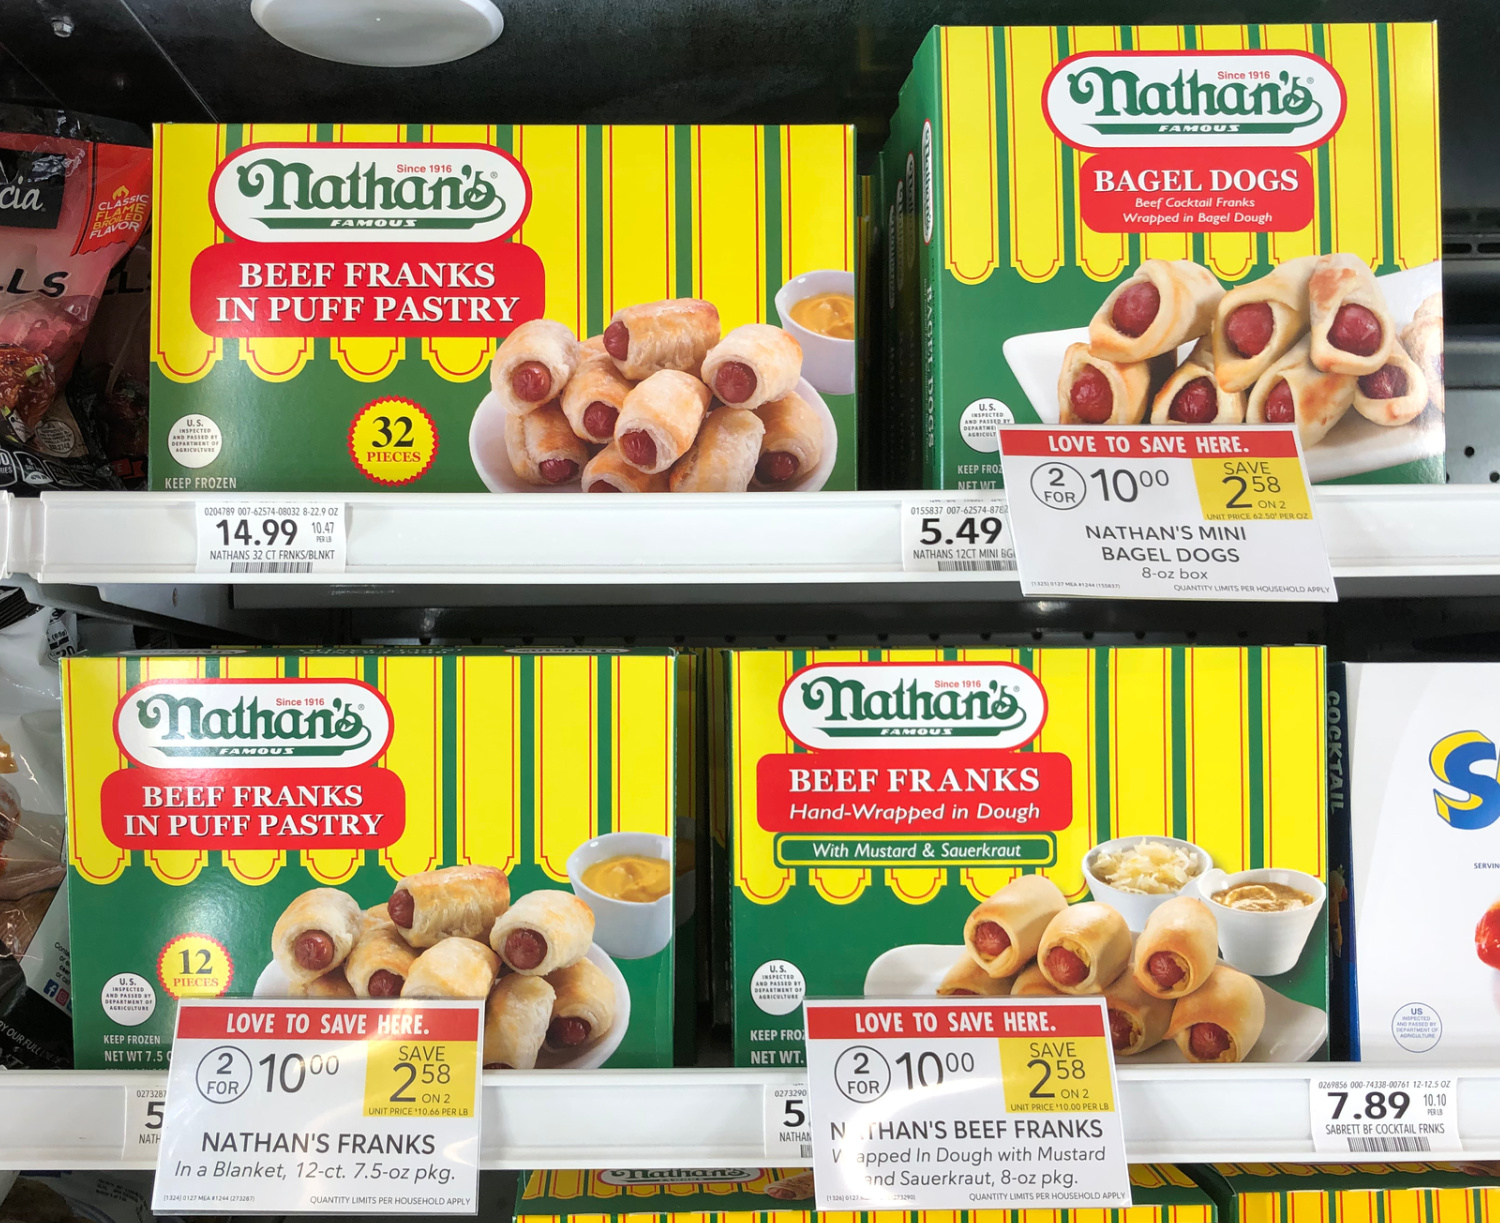 Get Ready For The Big Game With A Super Deal On Your Favorite Nathan's Snacks! on I Heart Publix 3